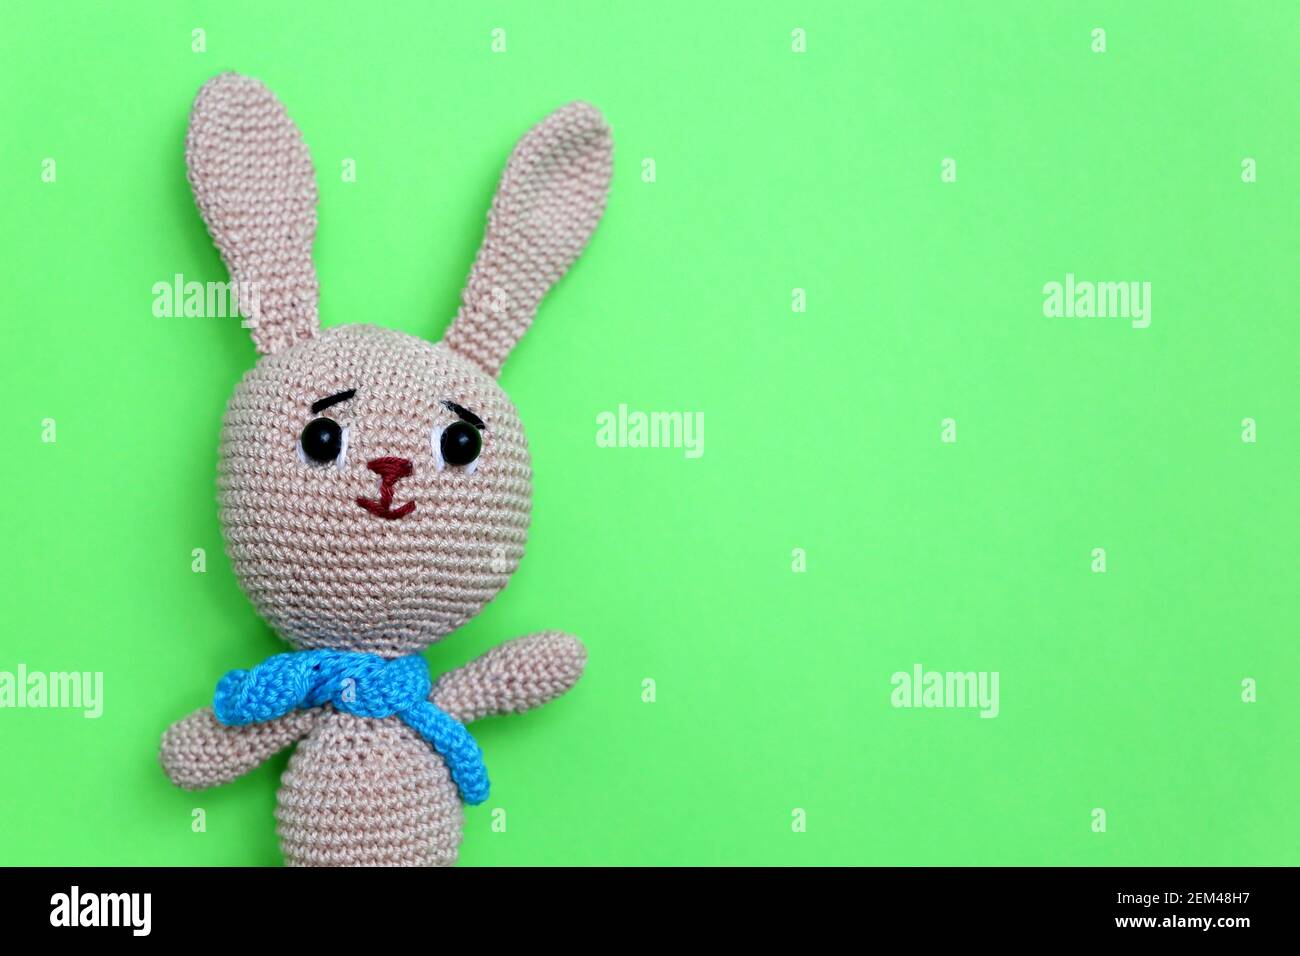 Easter Bunny on light green background. Greeting card with knitted toy rabbit with free copy space Stock Photo